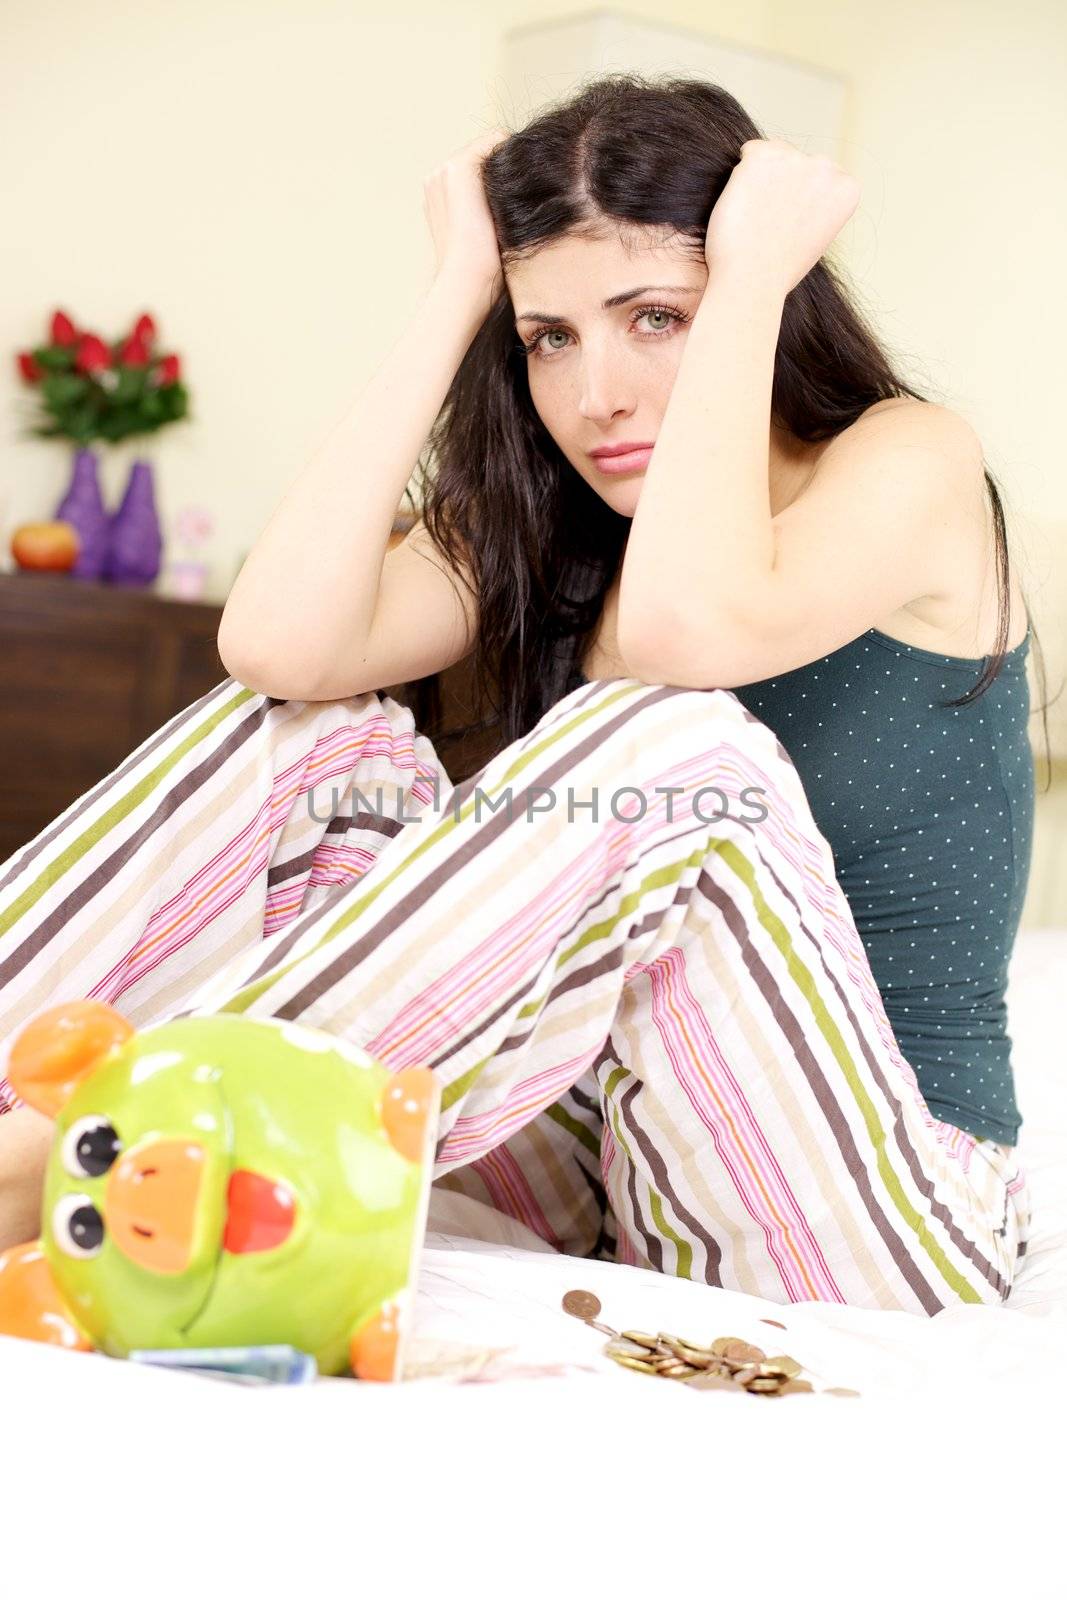 Woman without a job is depressed in economical depression crisis